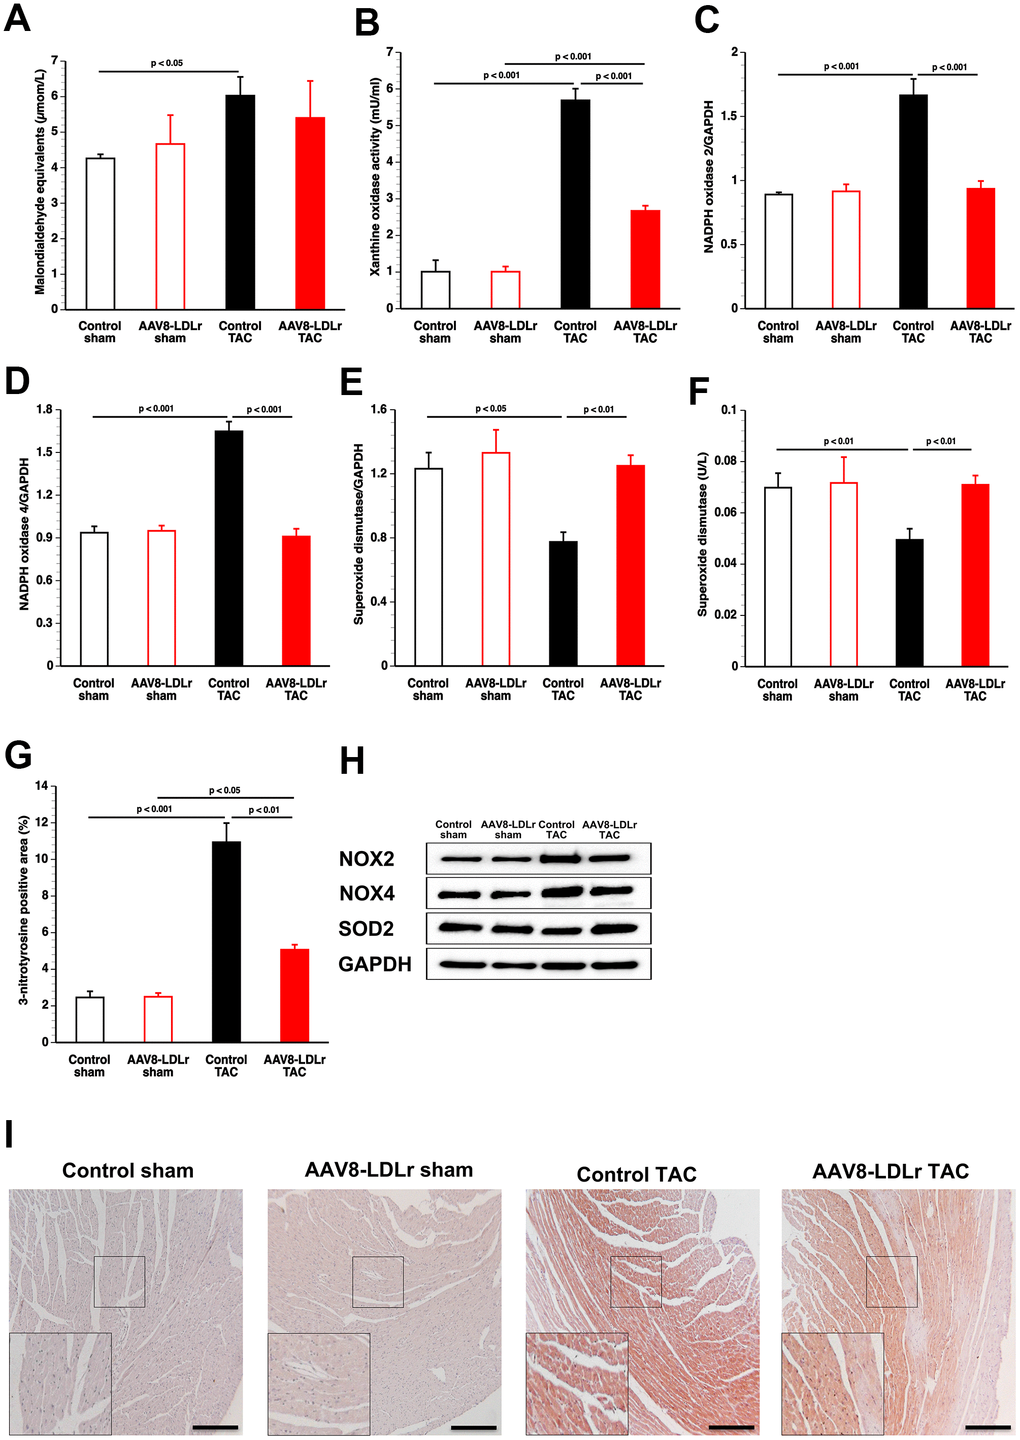 Cholesterol lowering gene therapy in TAC mice reduces pro-oxidative enzymes, increases anti-oxidant defence systems, and decreases nitro-oxidative stress in the myocardium. Bar graphs illustrating plasma TBARS expressed as plasma malondialdehyde equivalents (A), plasma xanthine oxidase activity (B), myocardial protein level of NADPH oxidase 2 (C), of NADPH oxidase 4 (D), and of superoxide dismutase (E), and plasma superoxide dismutase activity (F) (n=8 for each condition). Percentage of 3-nitrotyrosine-positive area in the myocardium in control sham (n=14), AAV8-LDLr sham (n=11), control TAC (n=25), and AAV8-LDLr TAC (n=11) mice 8 weeks after operation (G). Data are expressed as means ± SEM. Representative images of western blots are shown in panel h. Representative photomicrographs showing myocardial sections stained for 3-nitrotyrosine (I). Scale bar represents 100 μm. Insets show a 4x magnification of the boxed region.